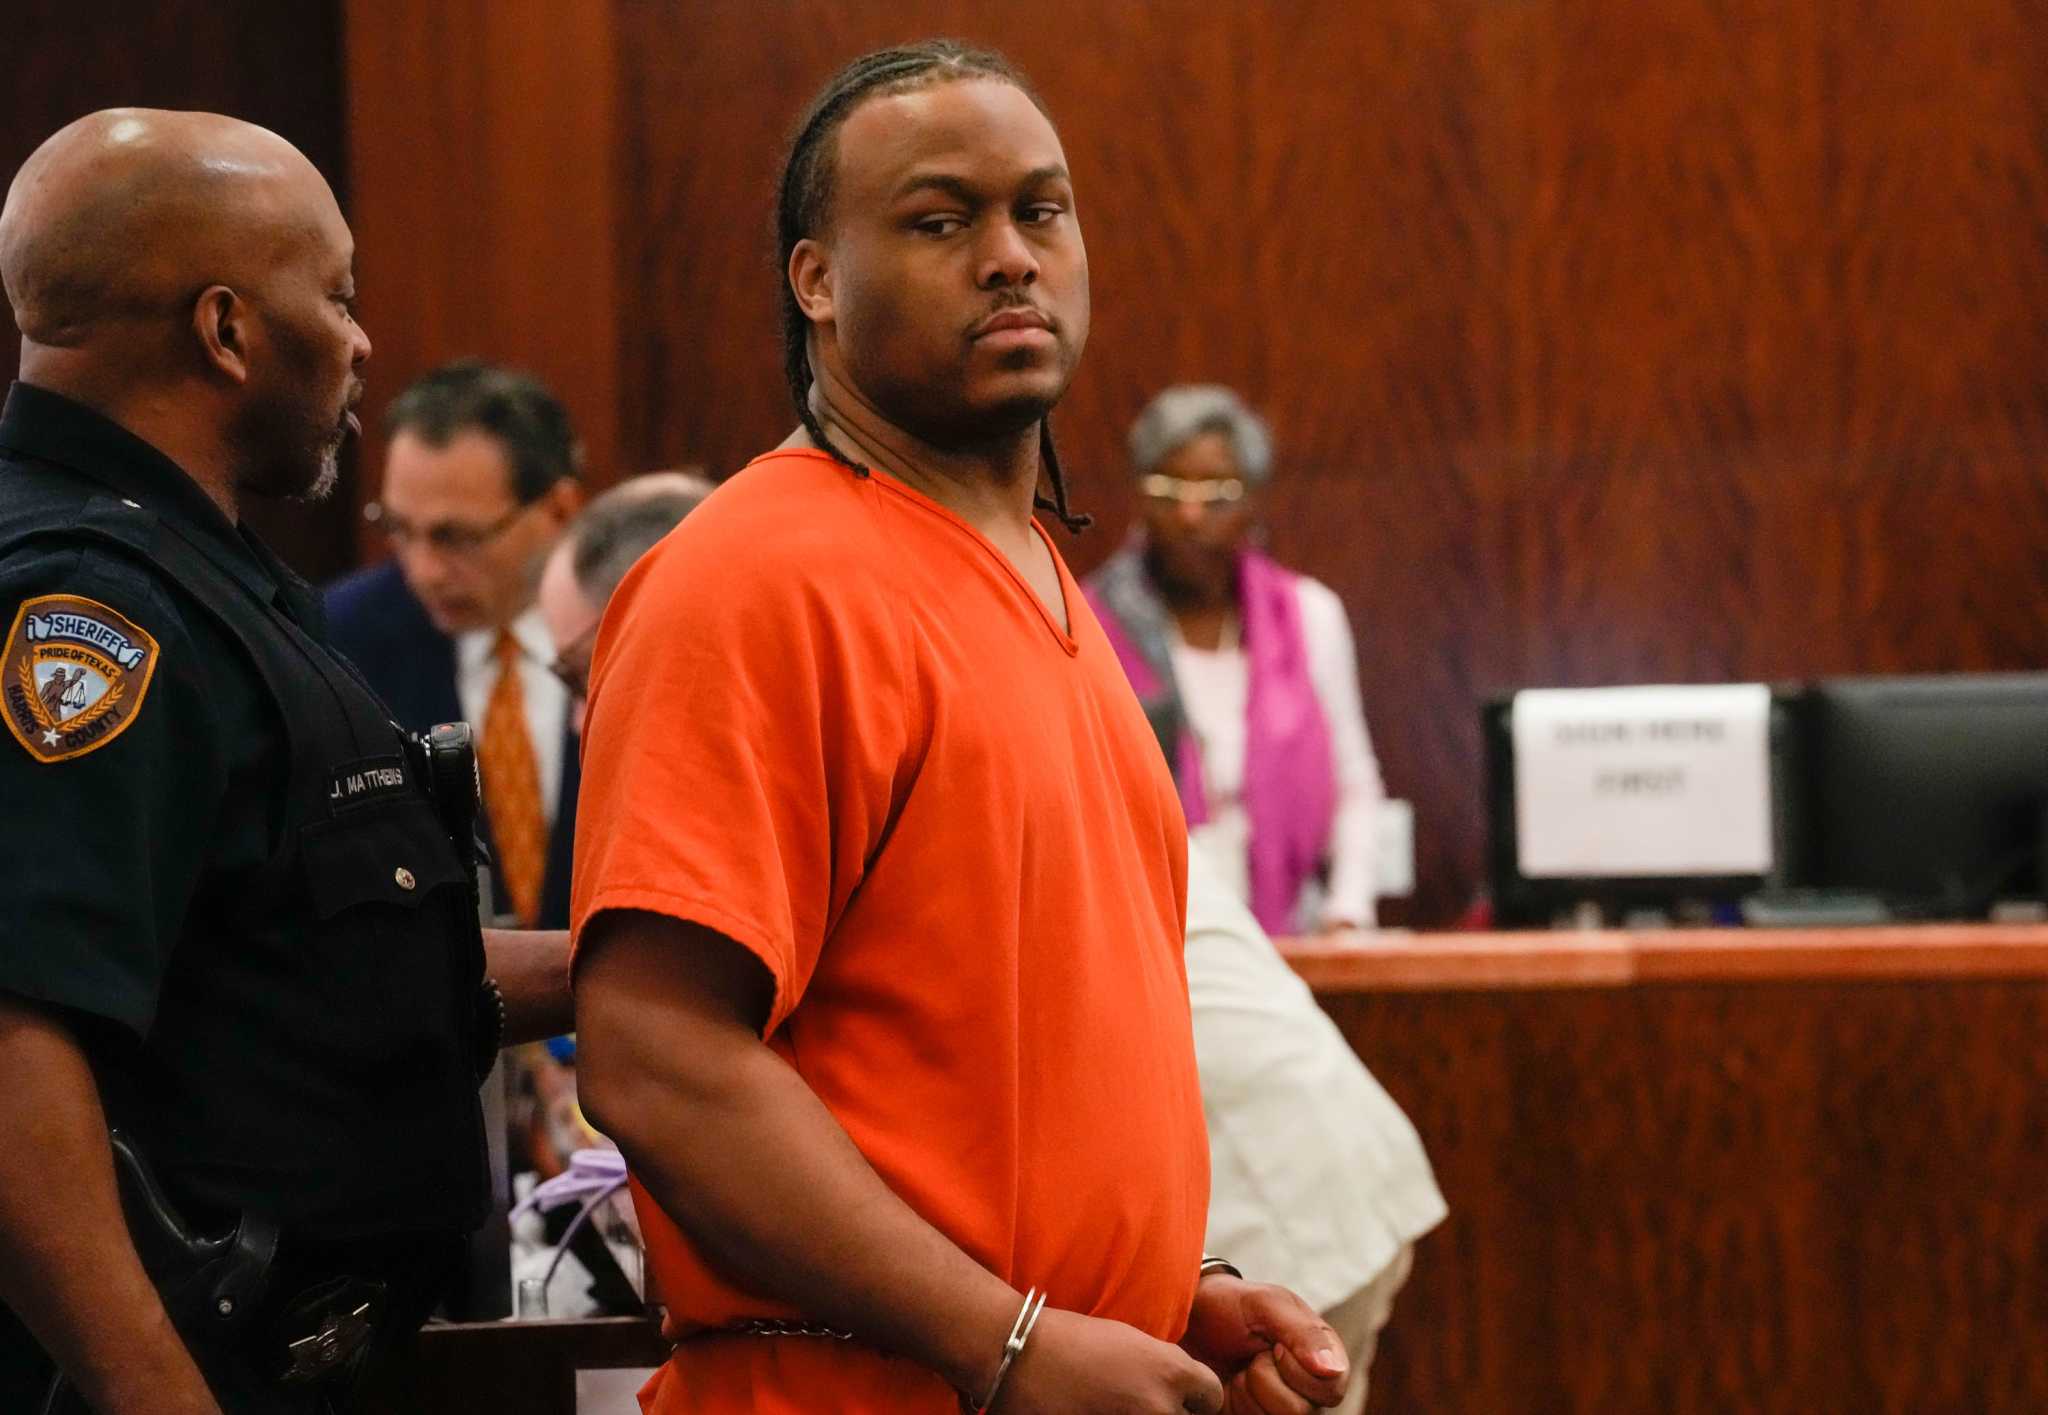 Patrick Xavier Clark What to know about Takeoff shooting, man charged